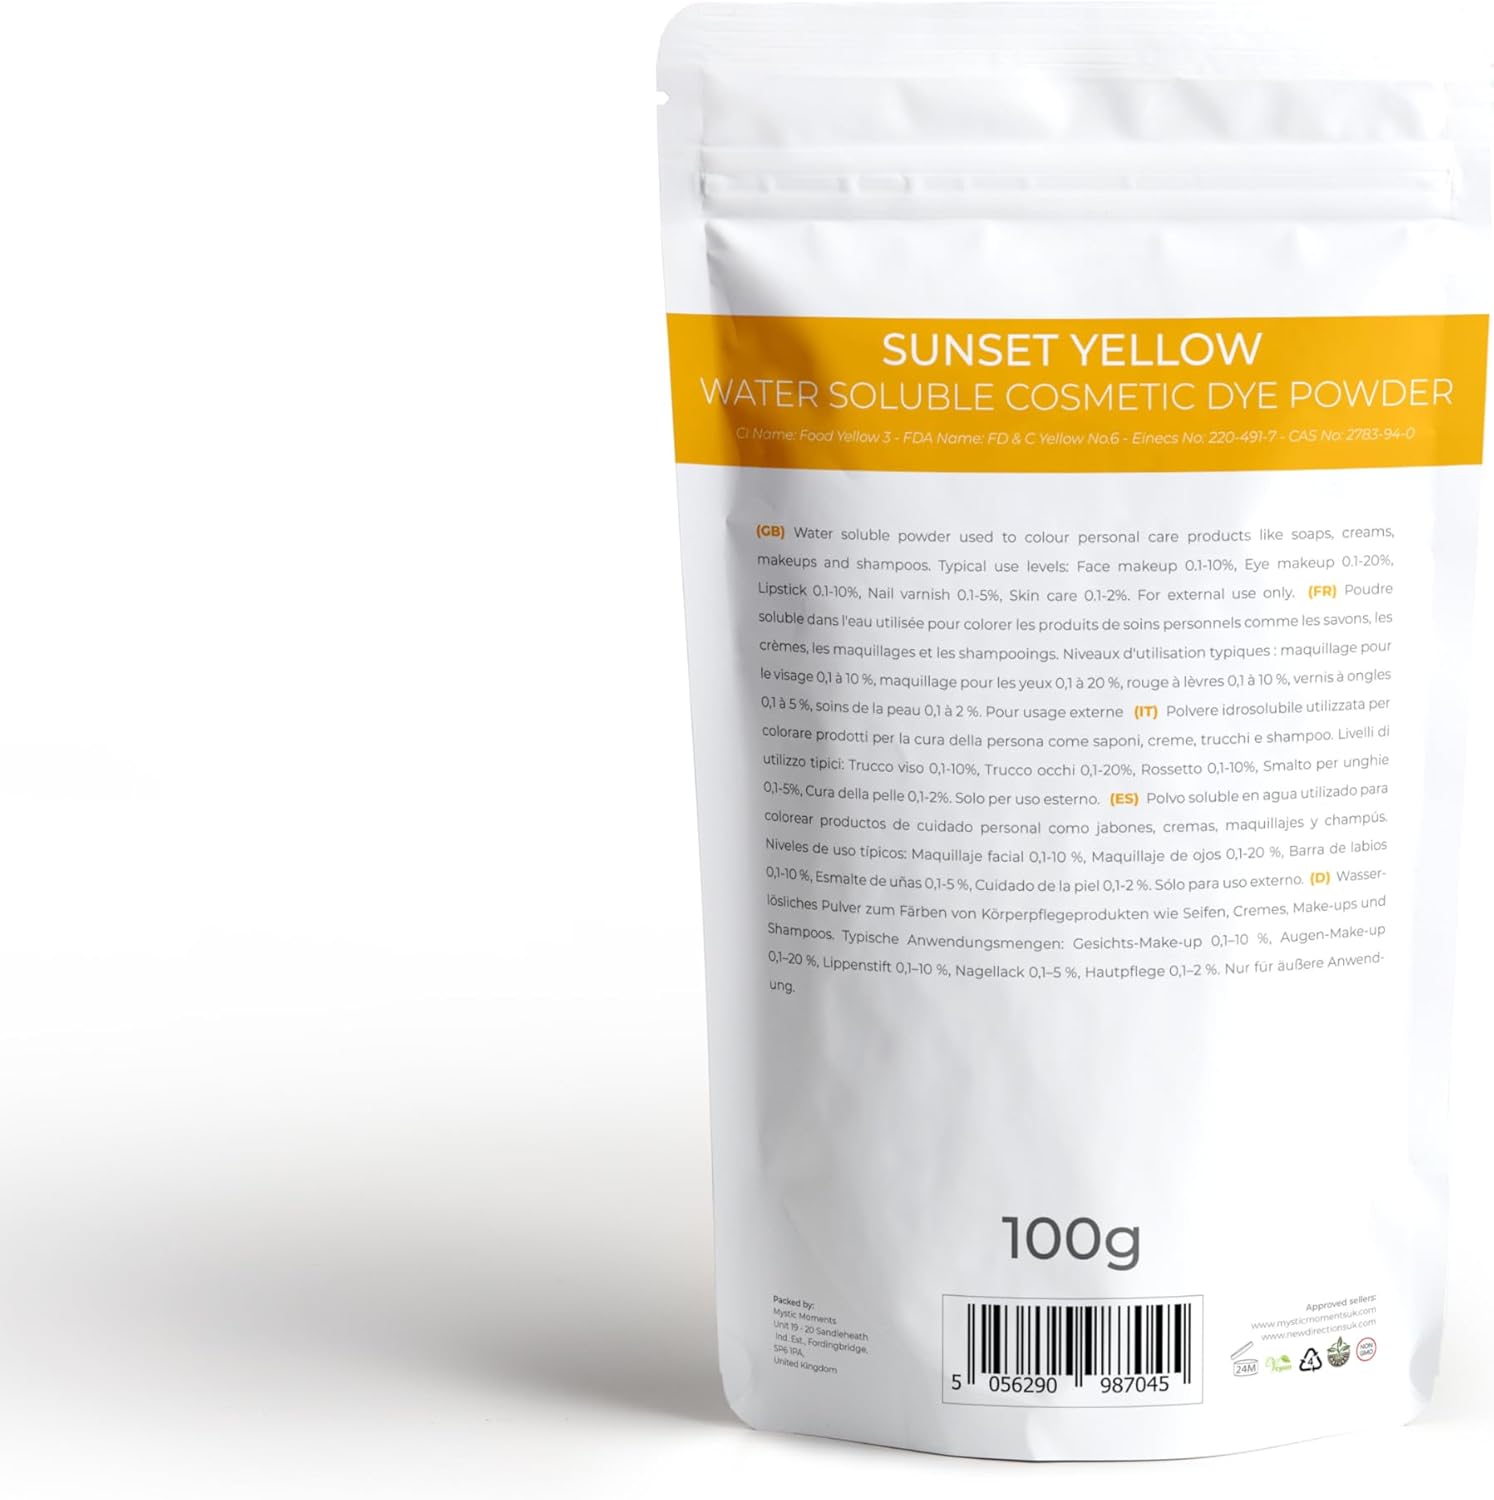 Mystic Moments | Sunset Yellow Water-Soluble Cosmetic Dye Powder 500g (5x100g Pouch) | Perfect for Soap Making, Creams, Make Ups, Shampoos and Lotions : Amazon.co.uk: Home & Kitchen